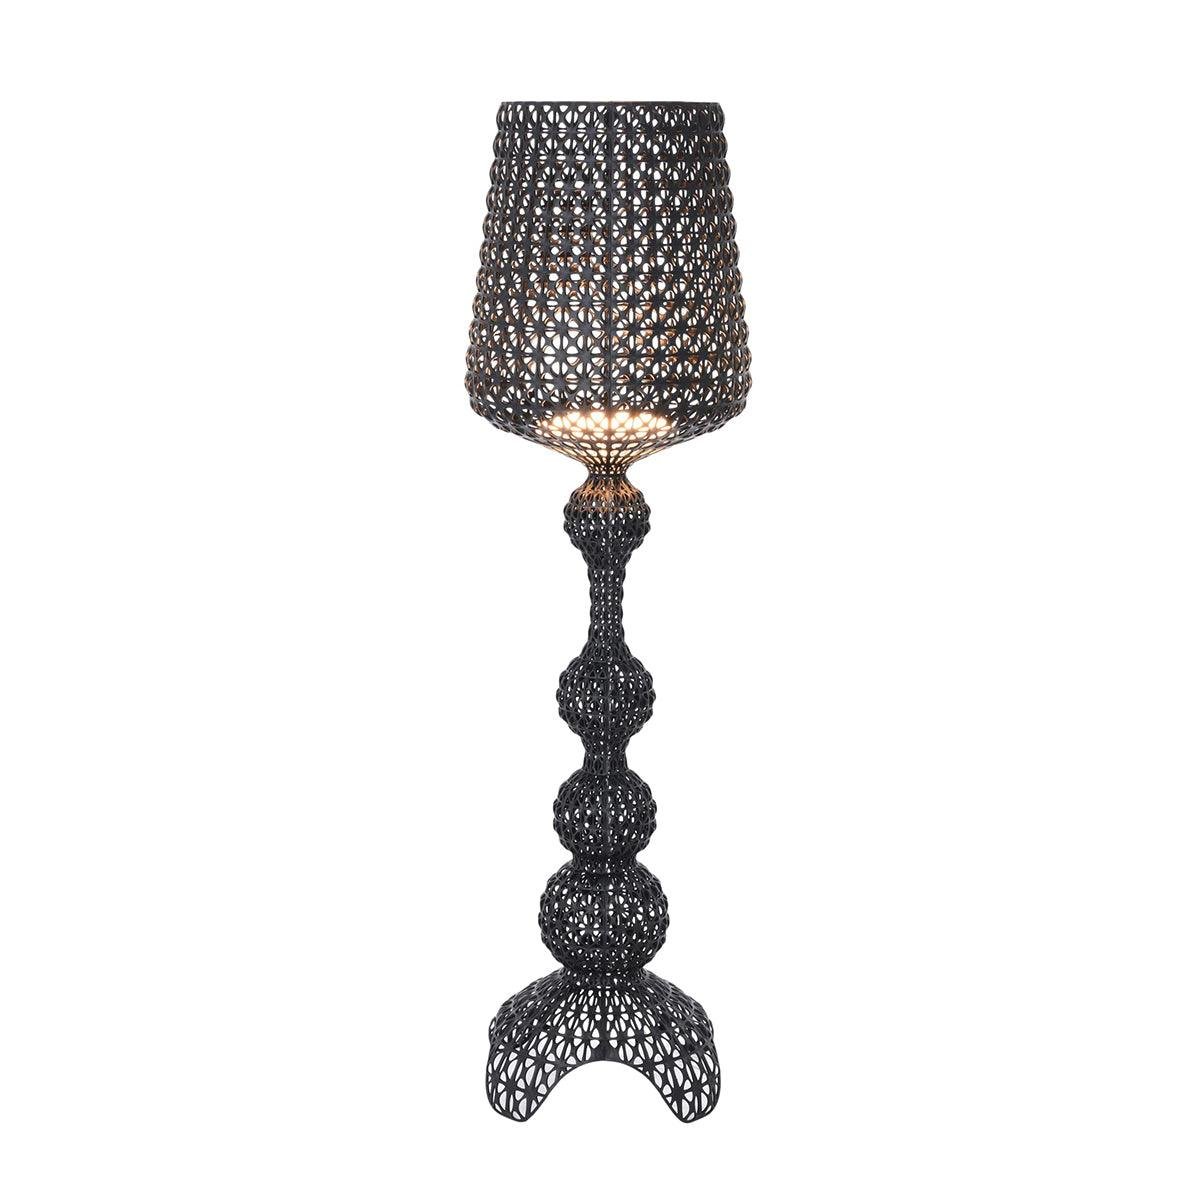 Black Kabuki Floor Lamp with EU plug, measuring 19.7 inches in diameter and 65.3 inches in height (50cm x 166cm).